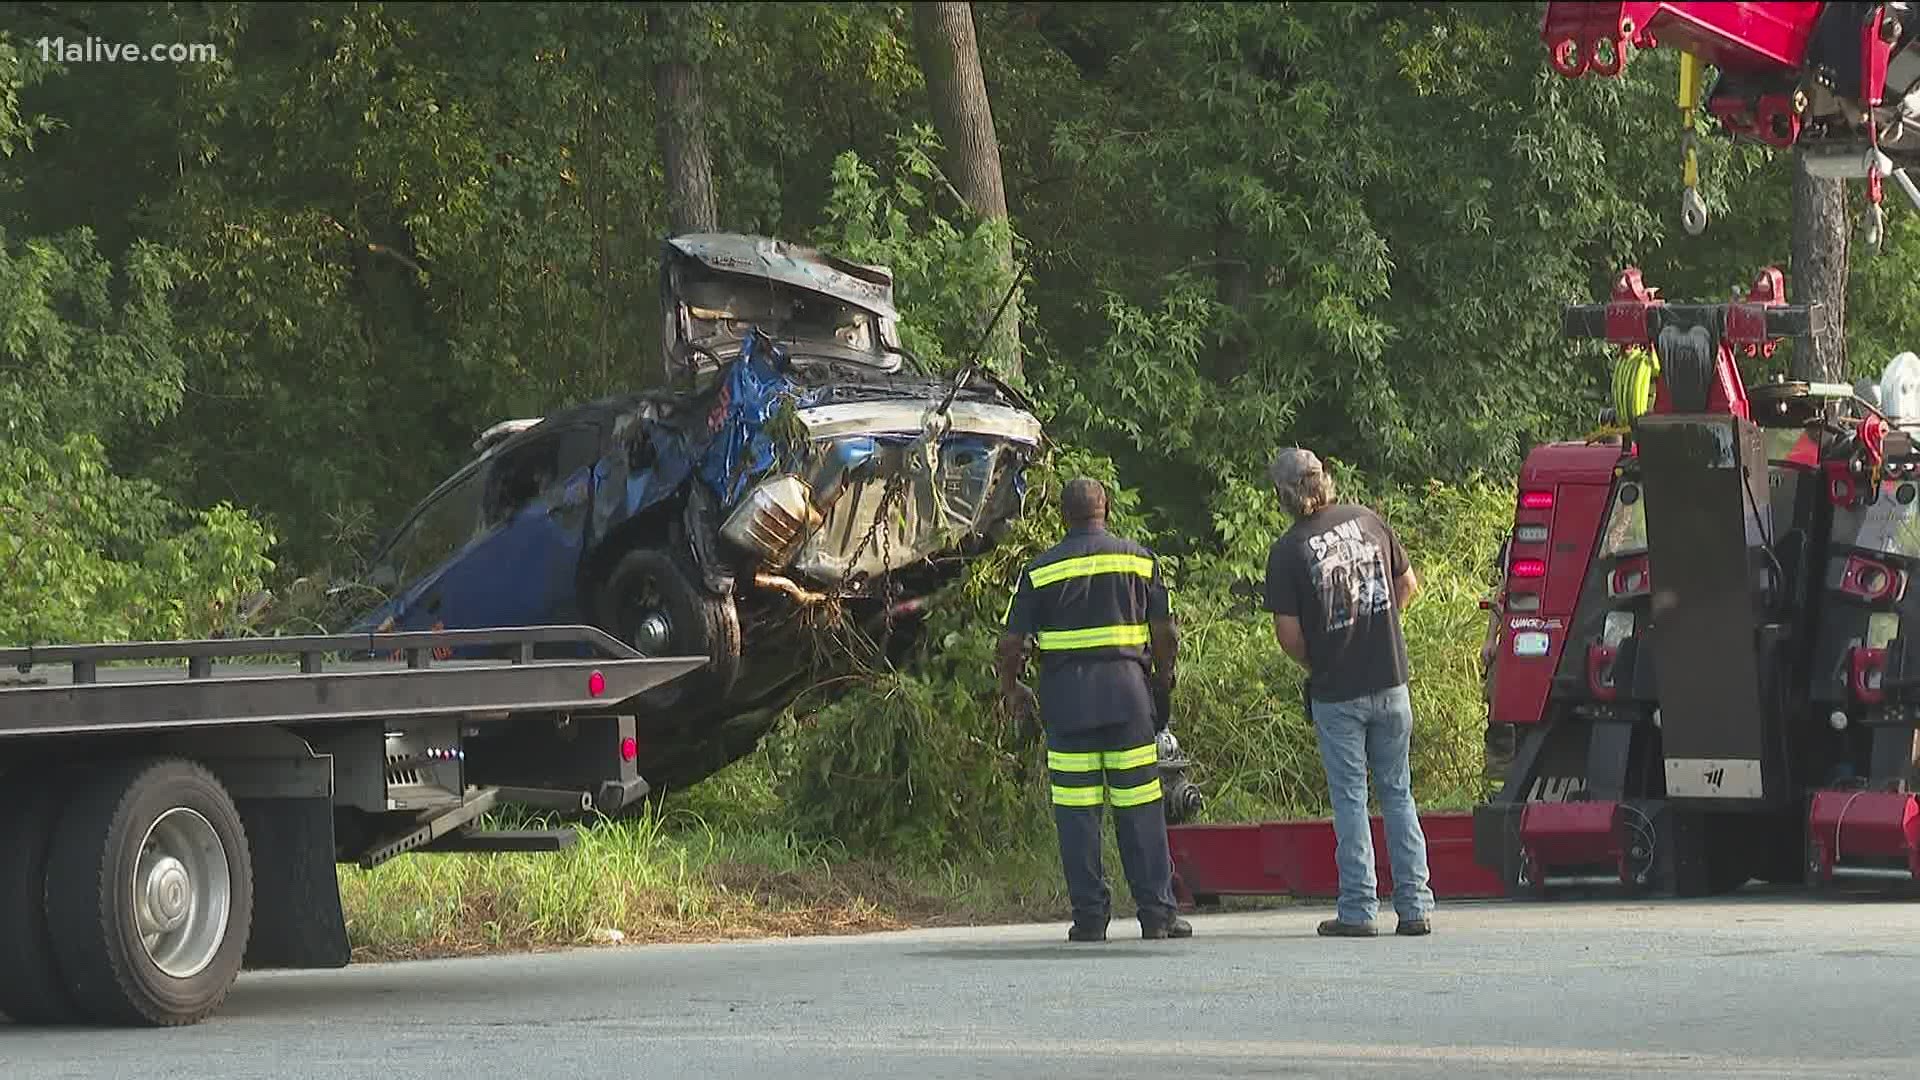 The trooper's vehicle was exiting I-285 at Bolton Road when the crash occurred, according to the GSP.